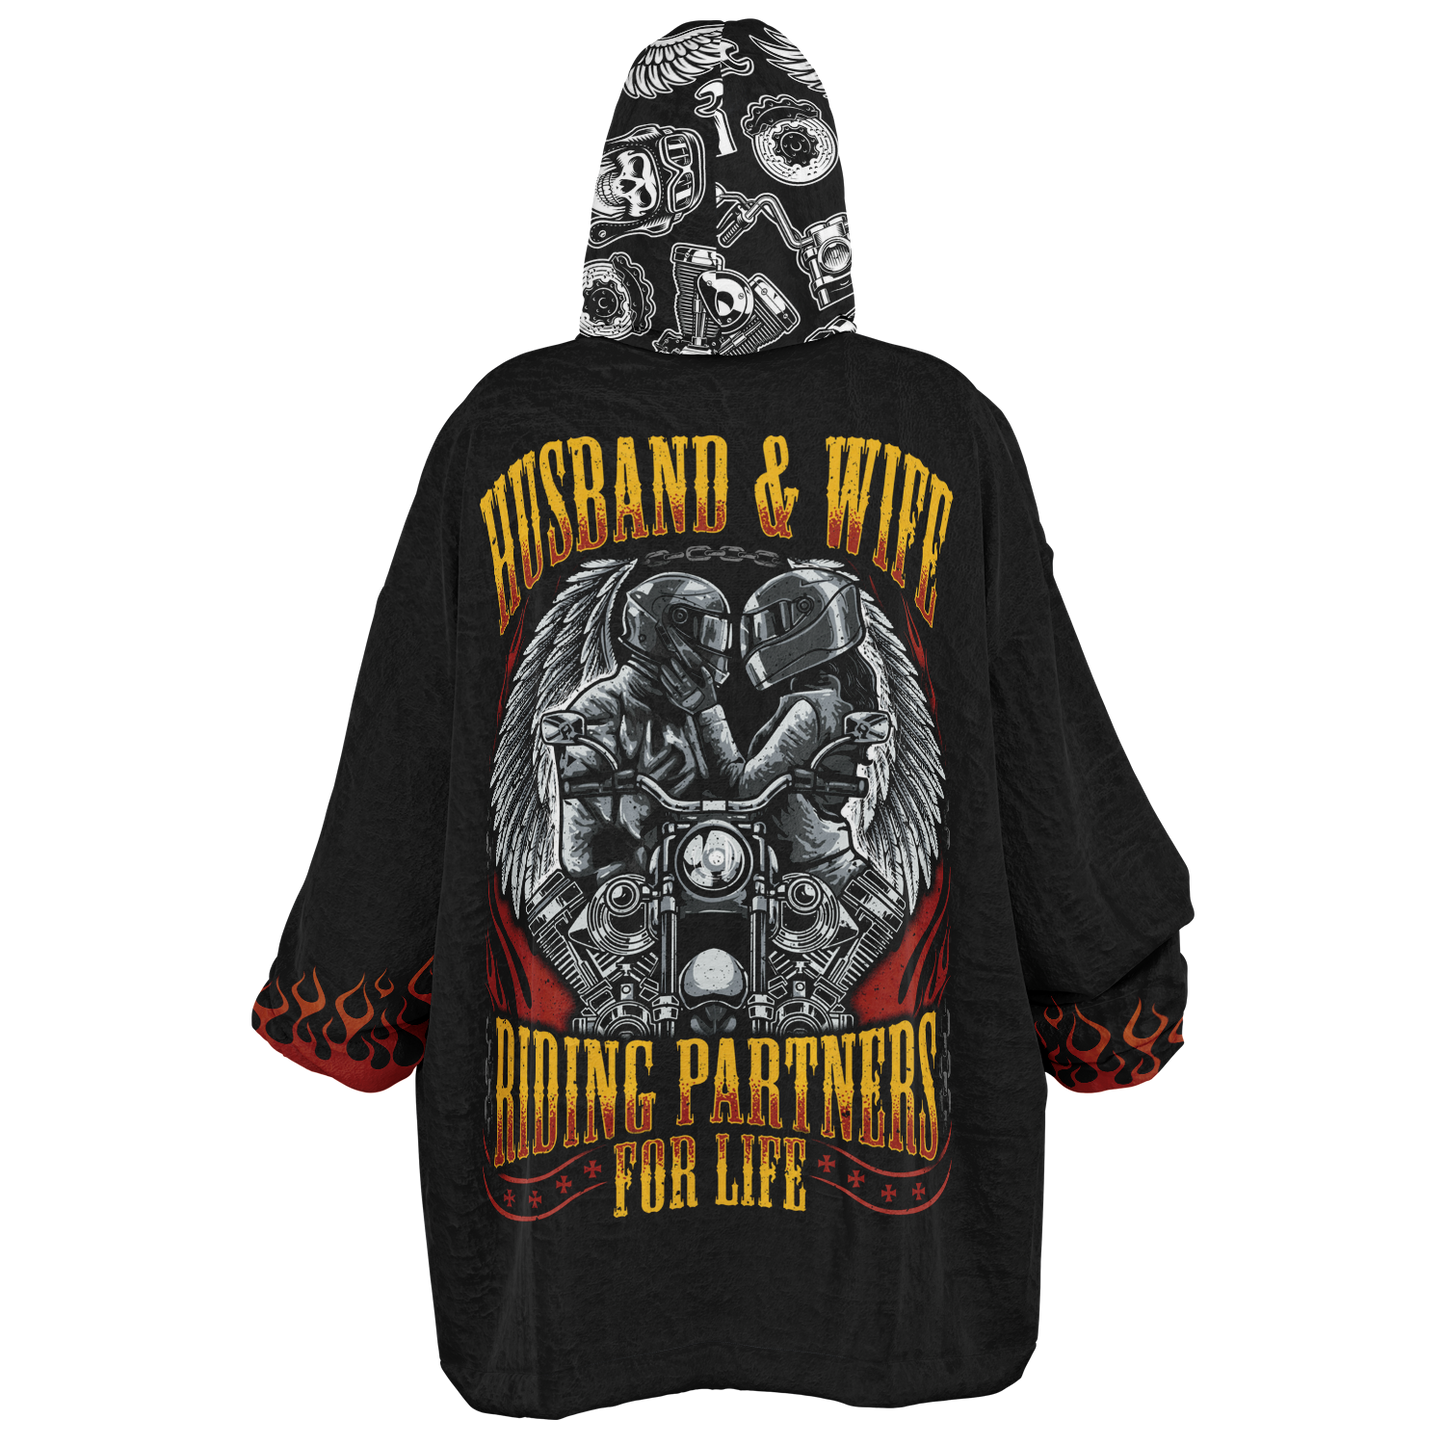 Husband & Wife Riding Partners Super Hoodie - Available for a Strictly Limited Time ⏰